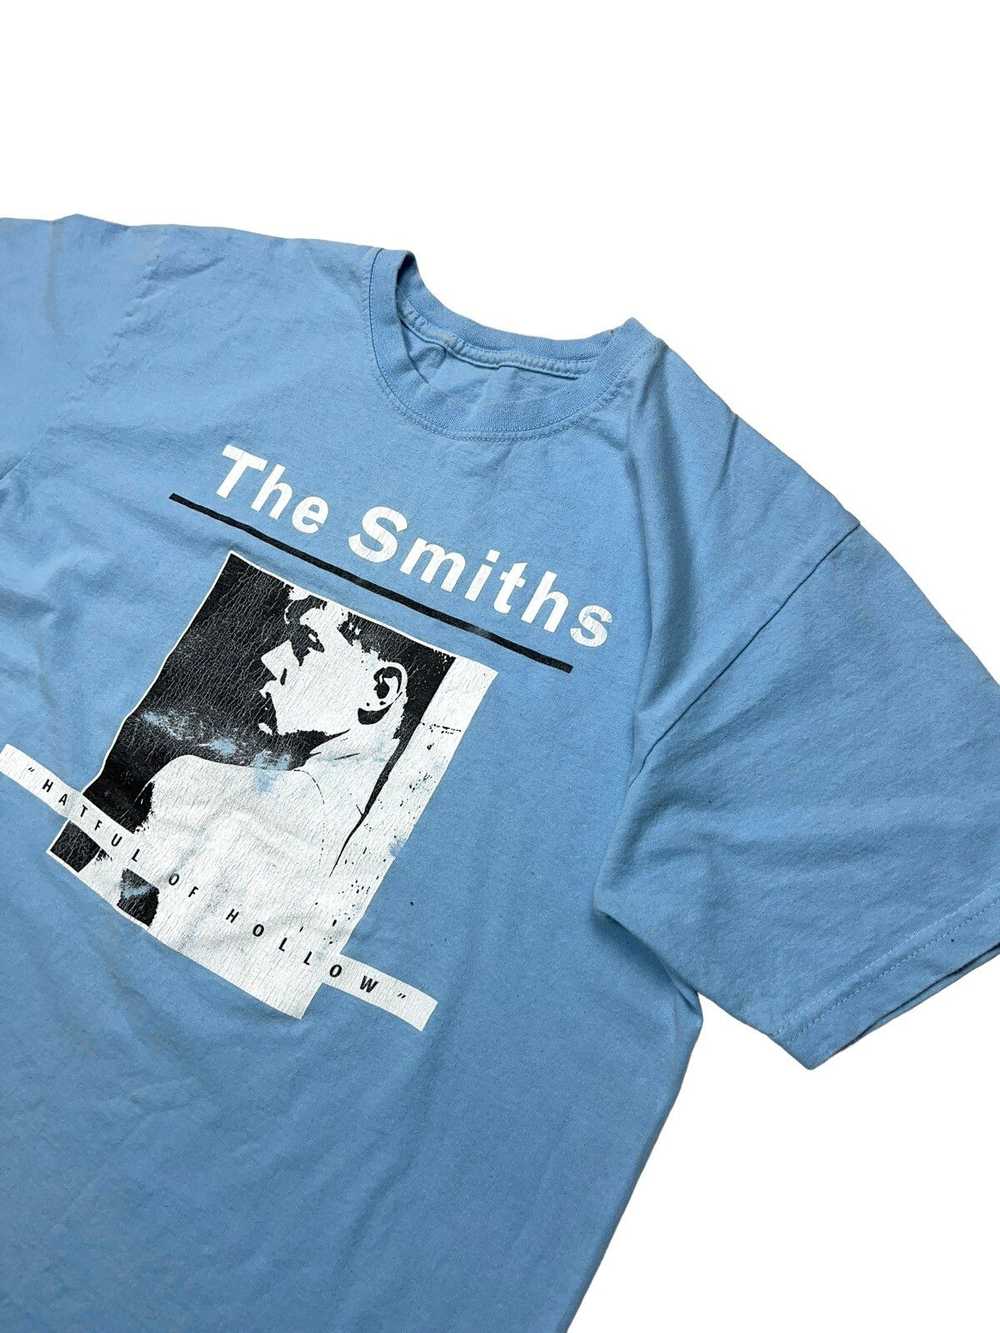 Band Tees × The Smiths × Vintage Vintage 00s The … - image 2